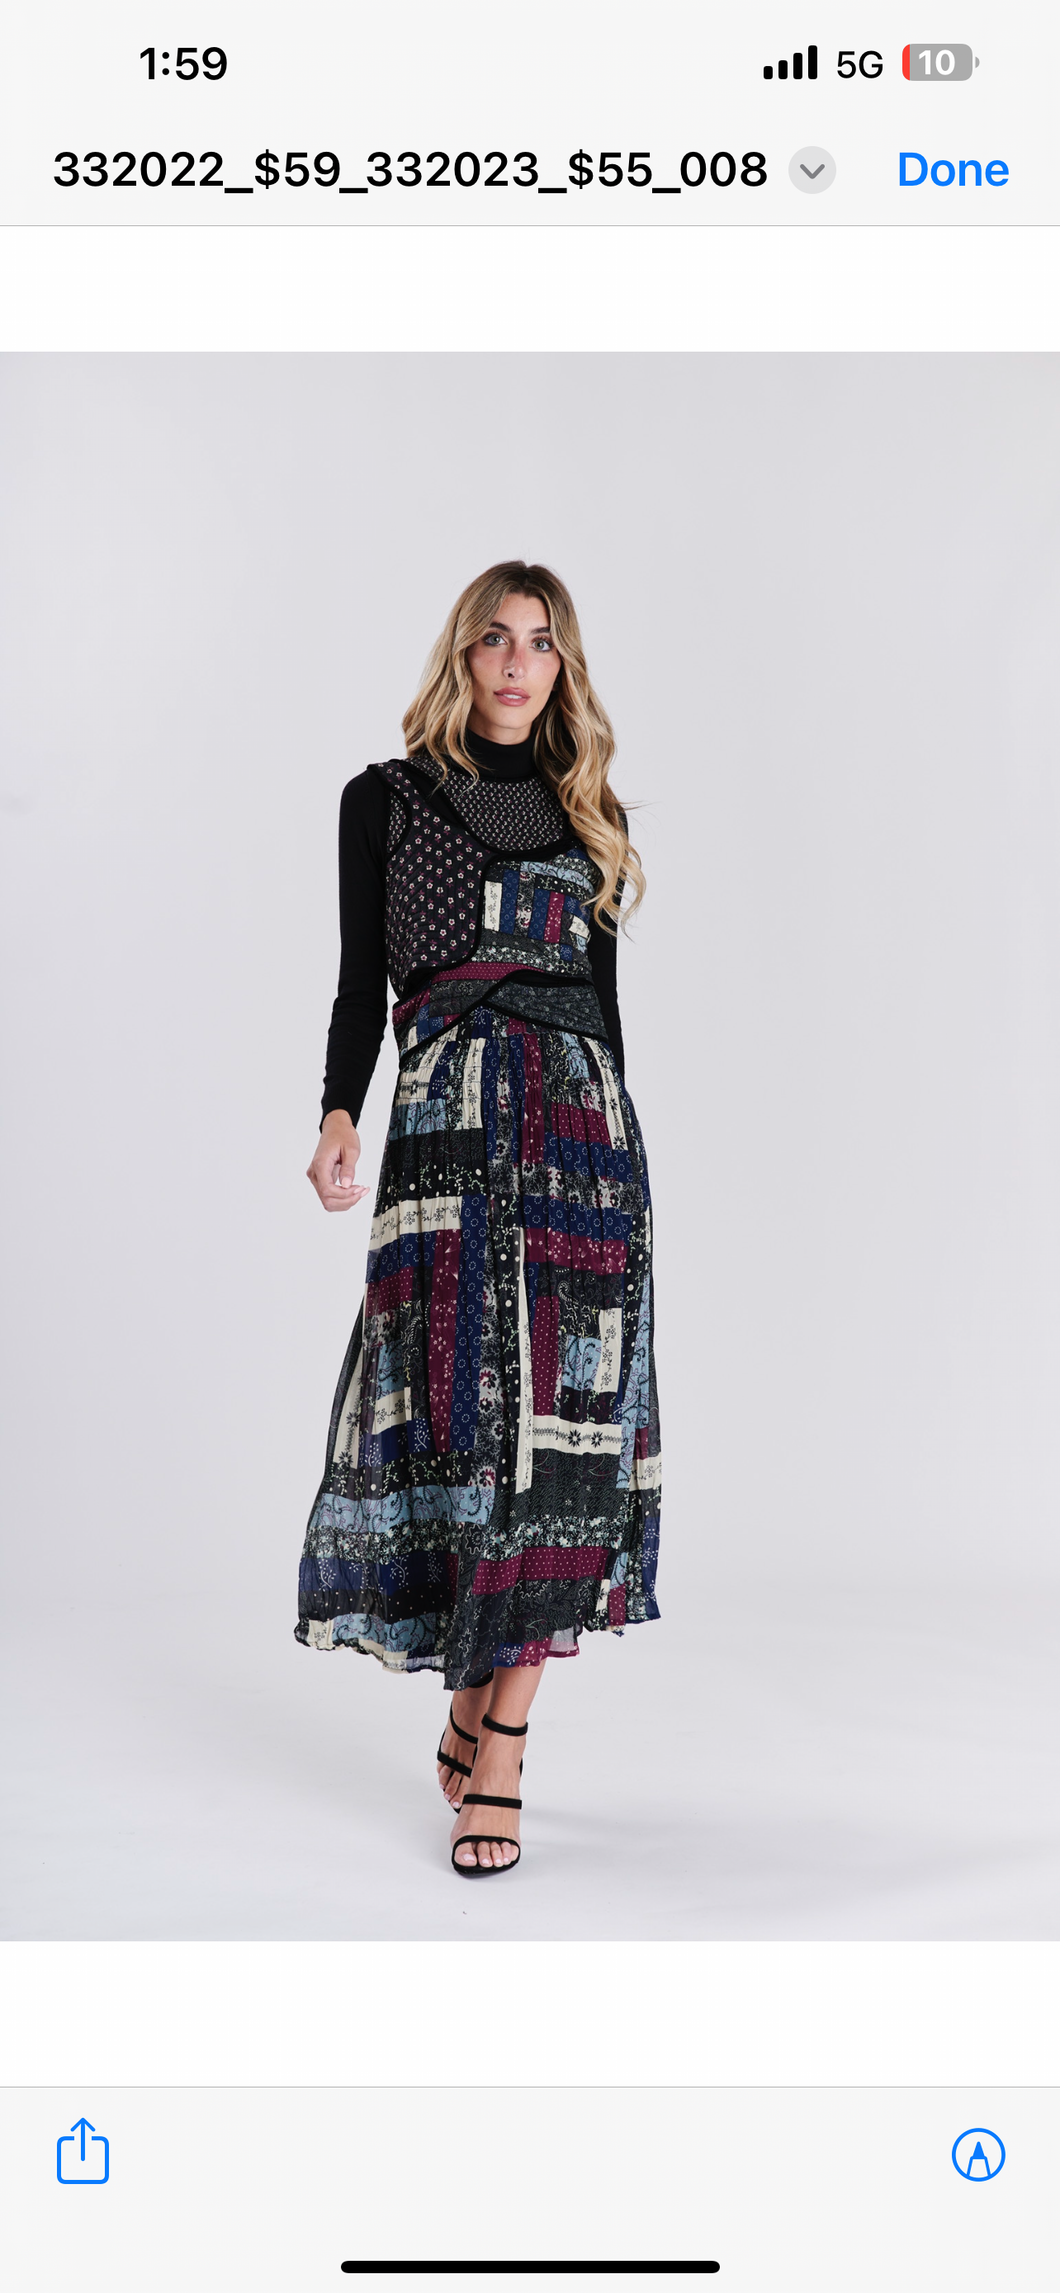 MW Quilted Patchwork Shirred Skirt